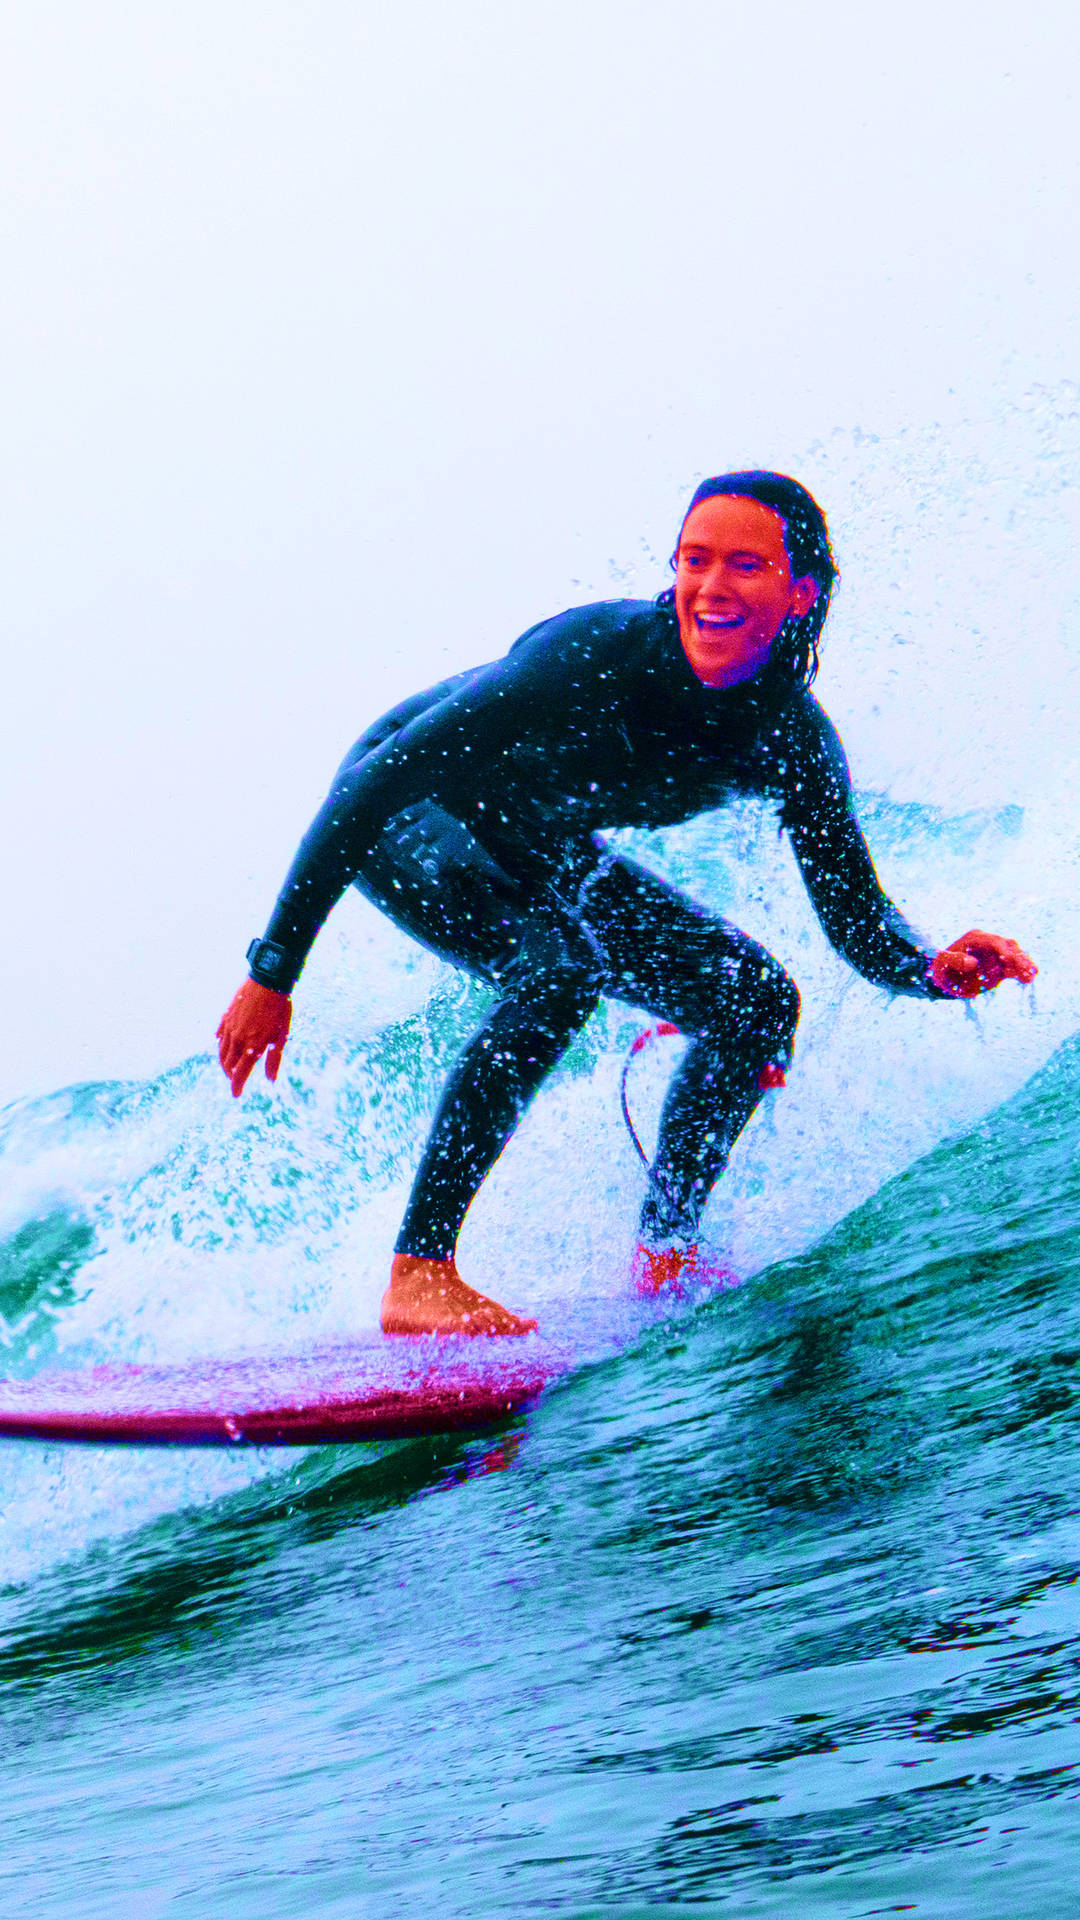 Girl Surfing With A Smile Background